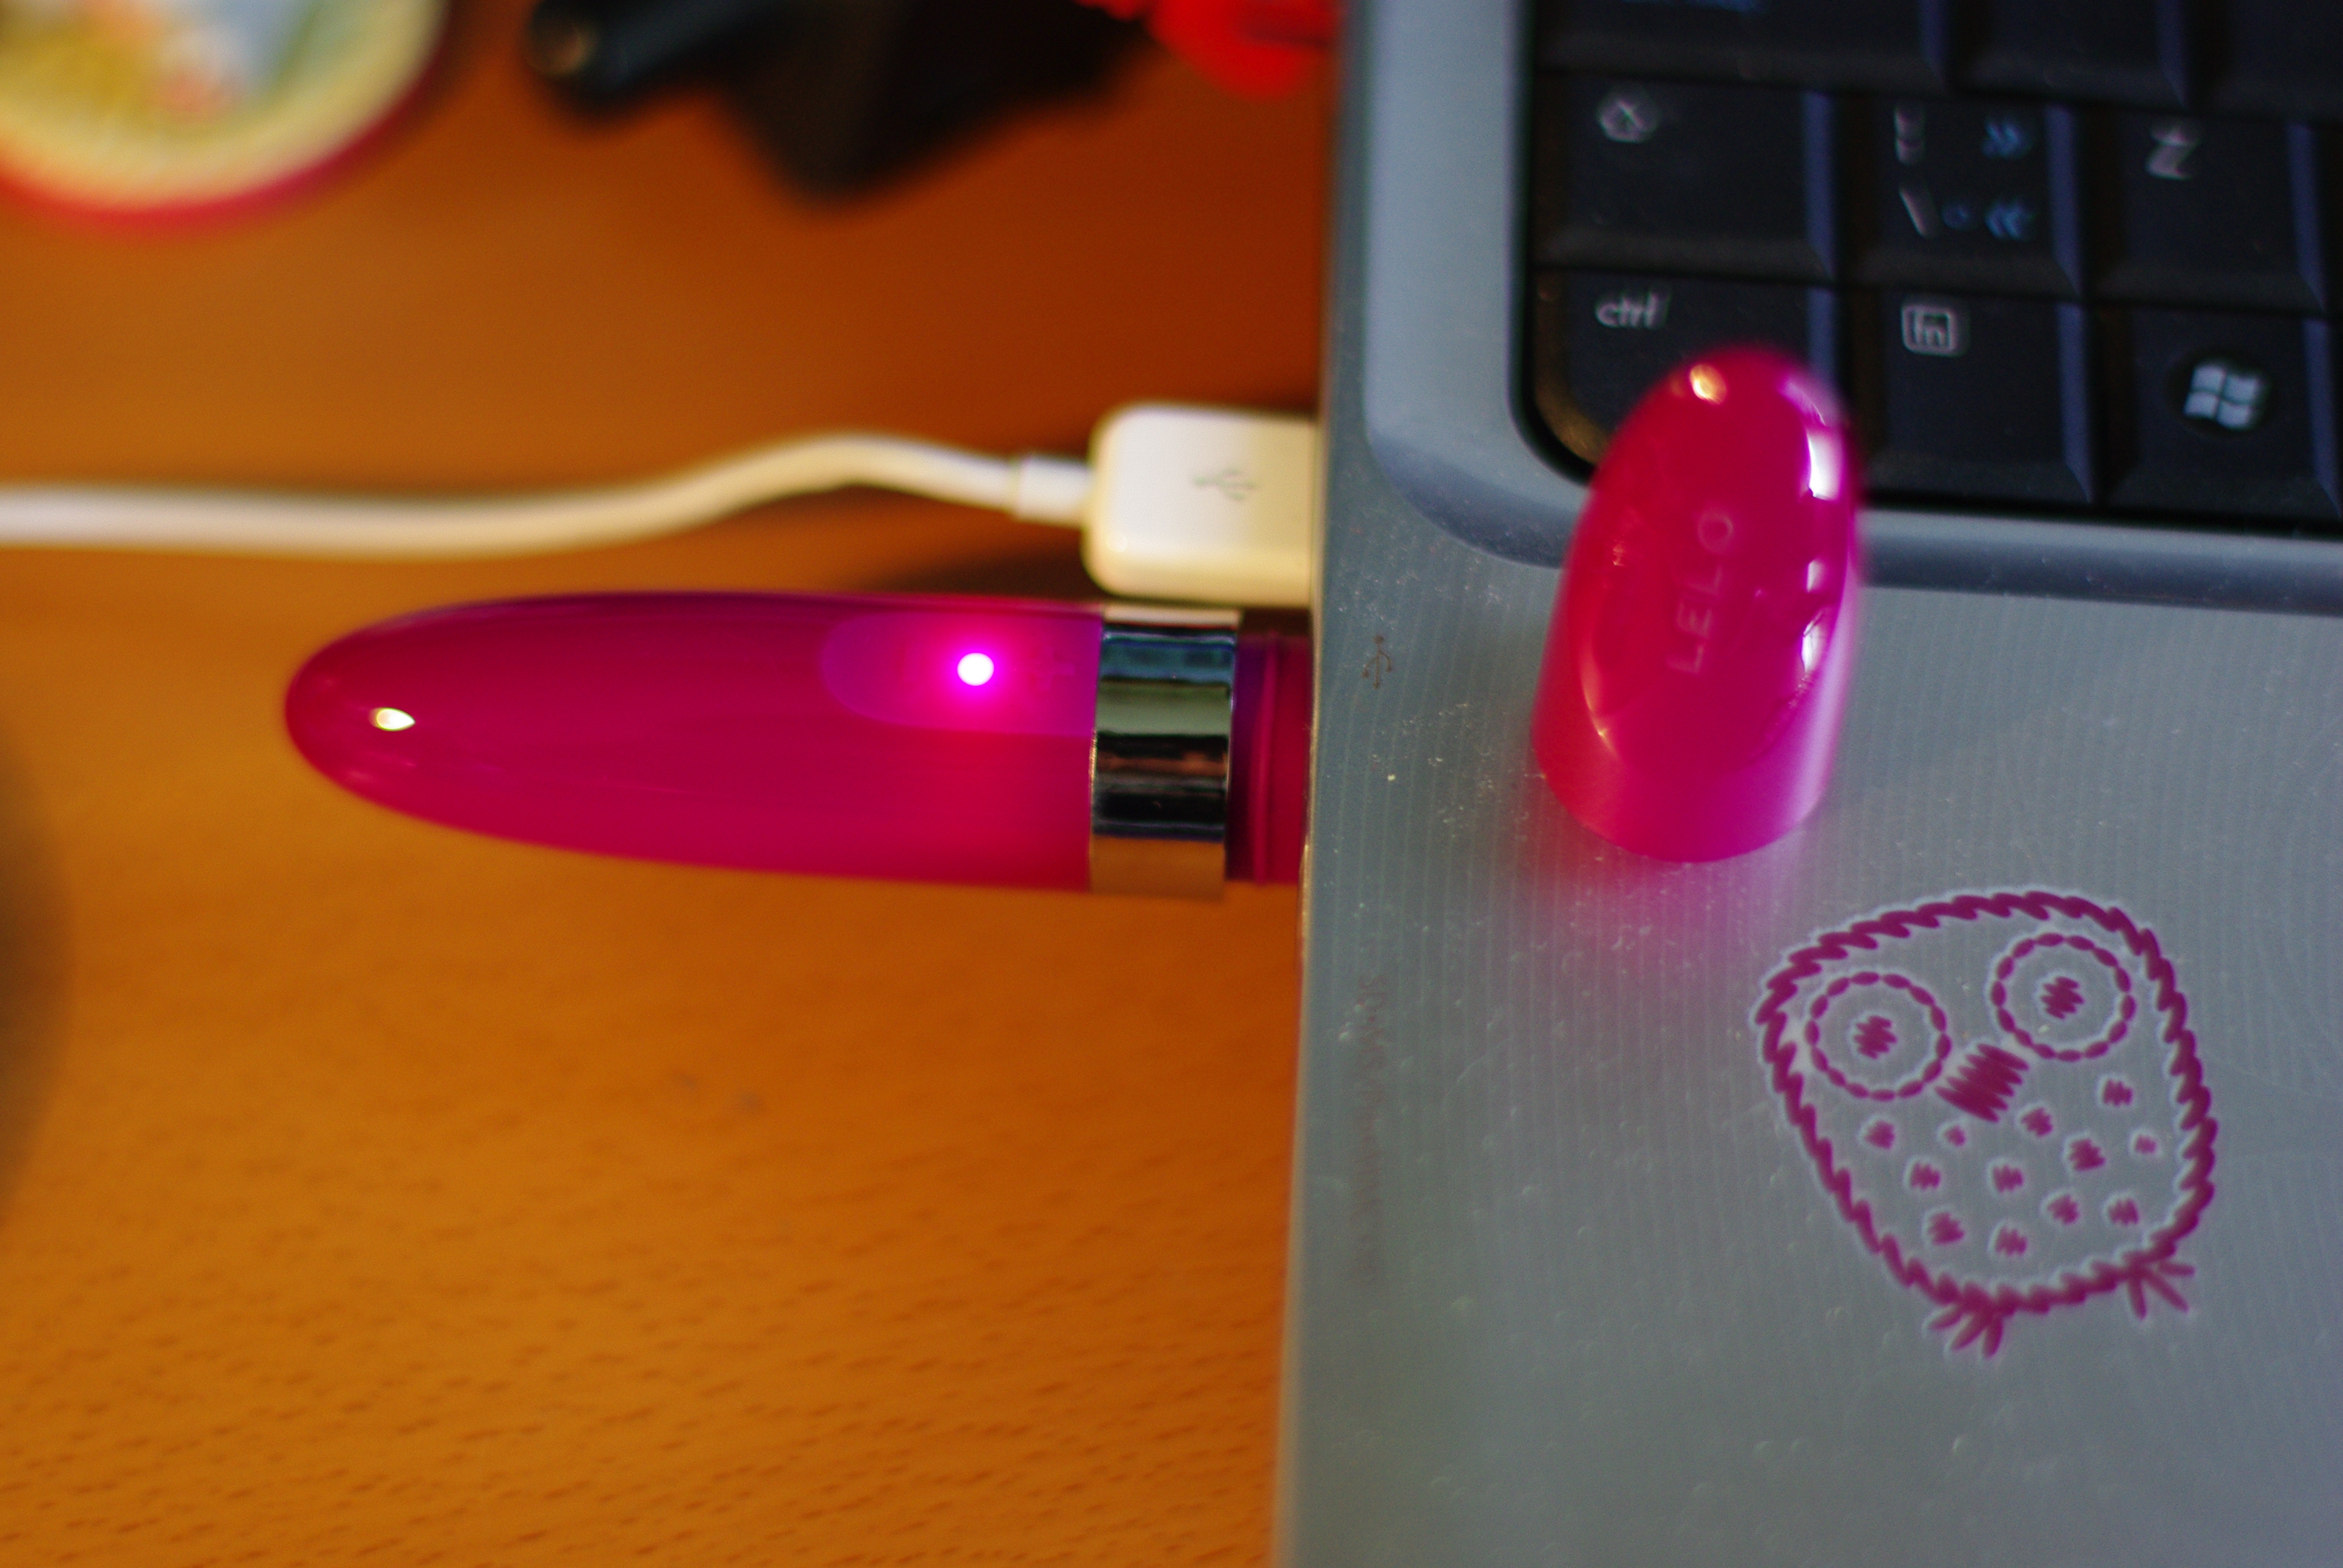 A vibrator charging through a computer USB port. (Image by Kimli on Flickr, CC BY-NC.)